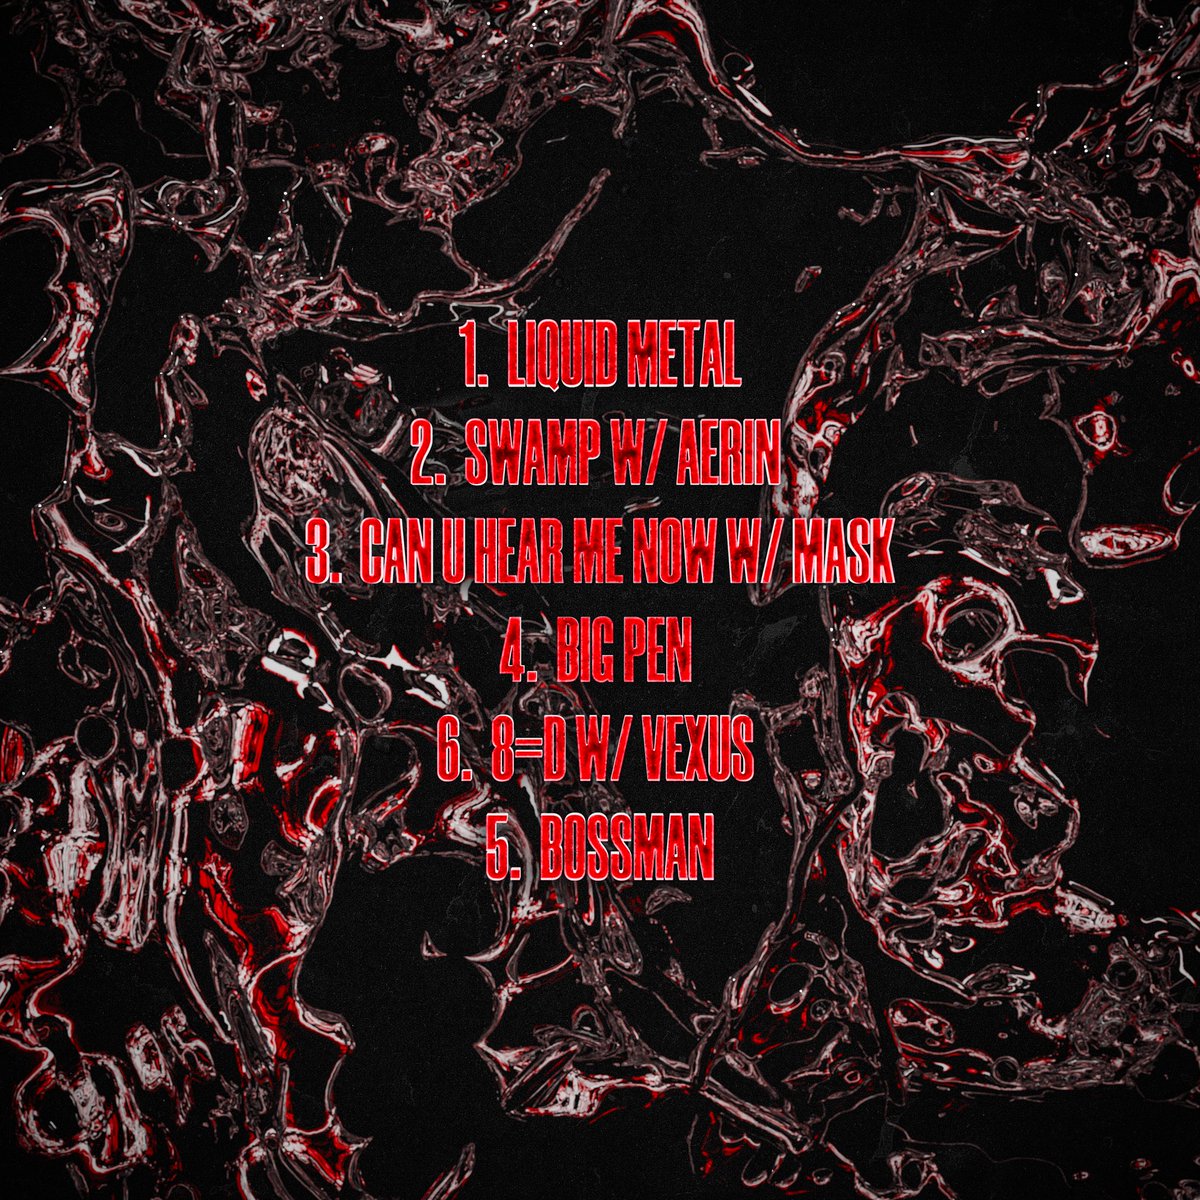 Track list for LIQUID METAL EP out Friday!!